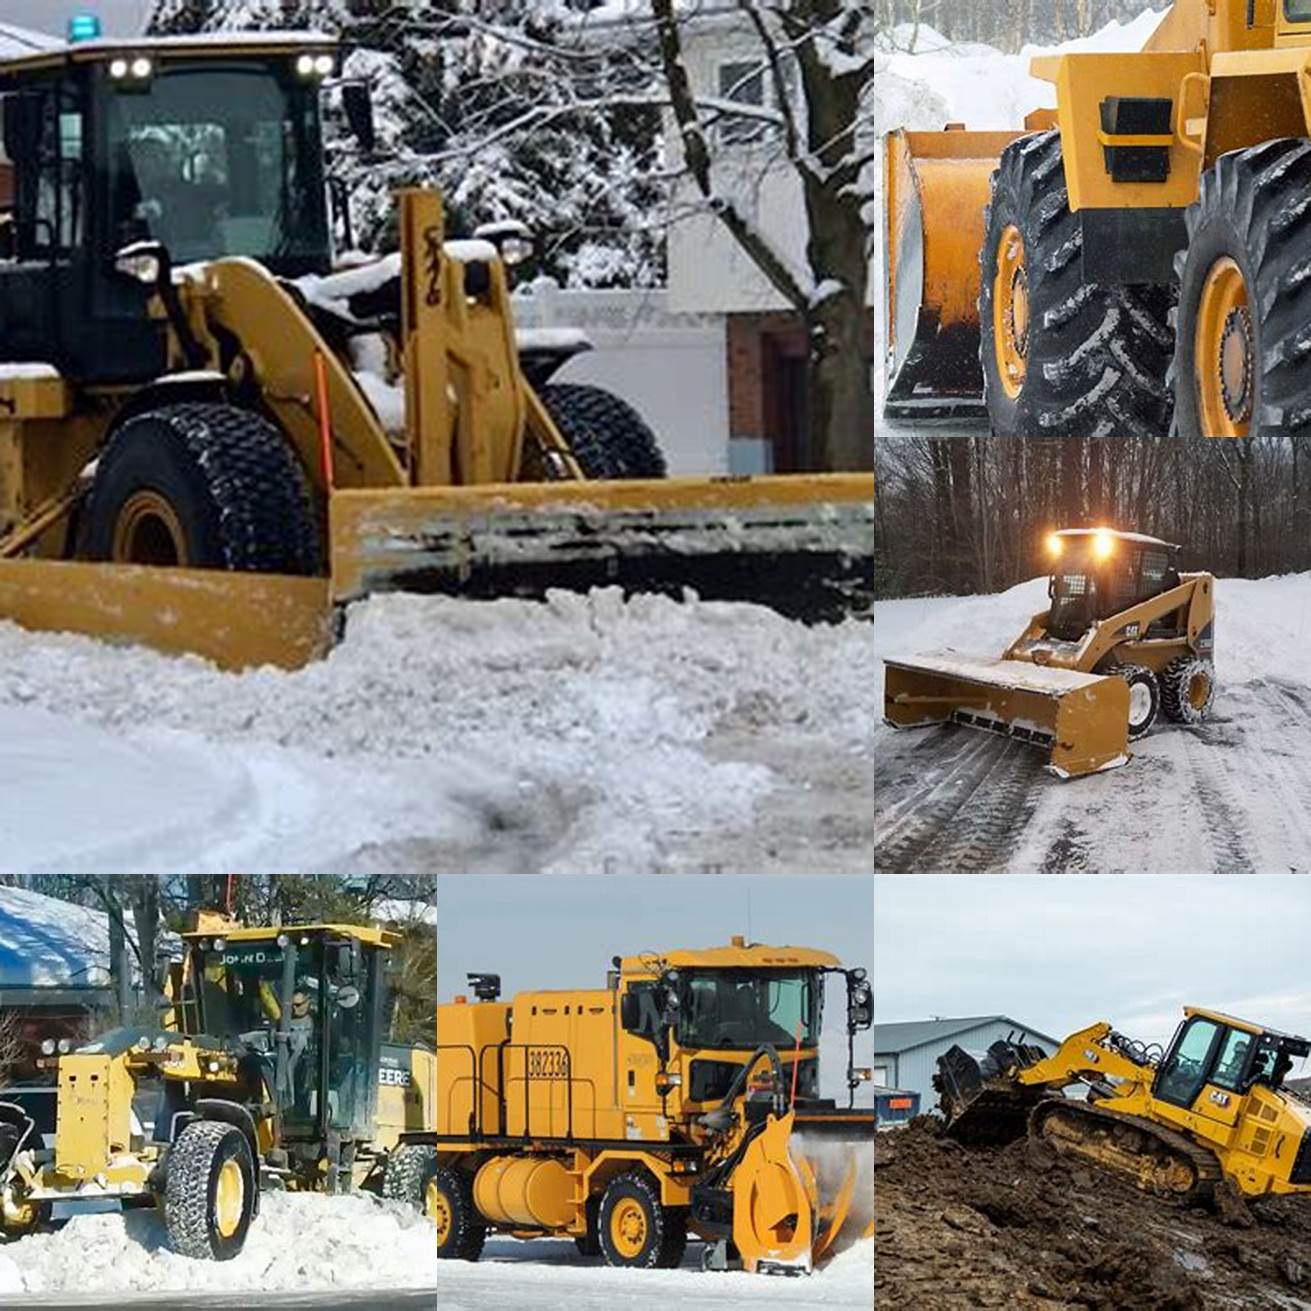 Snow Removal - The Cat 963 is also commonly used for snow removal particularly in areas with heavy snowfall